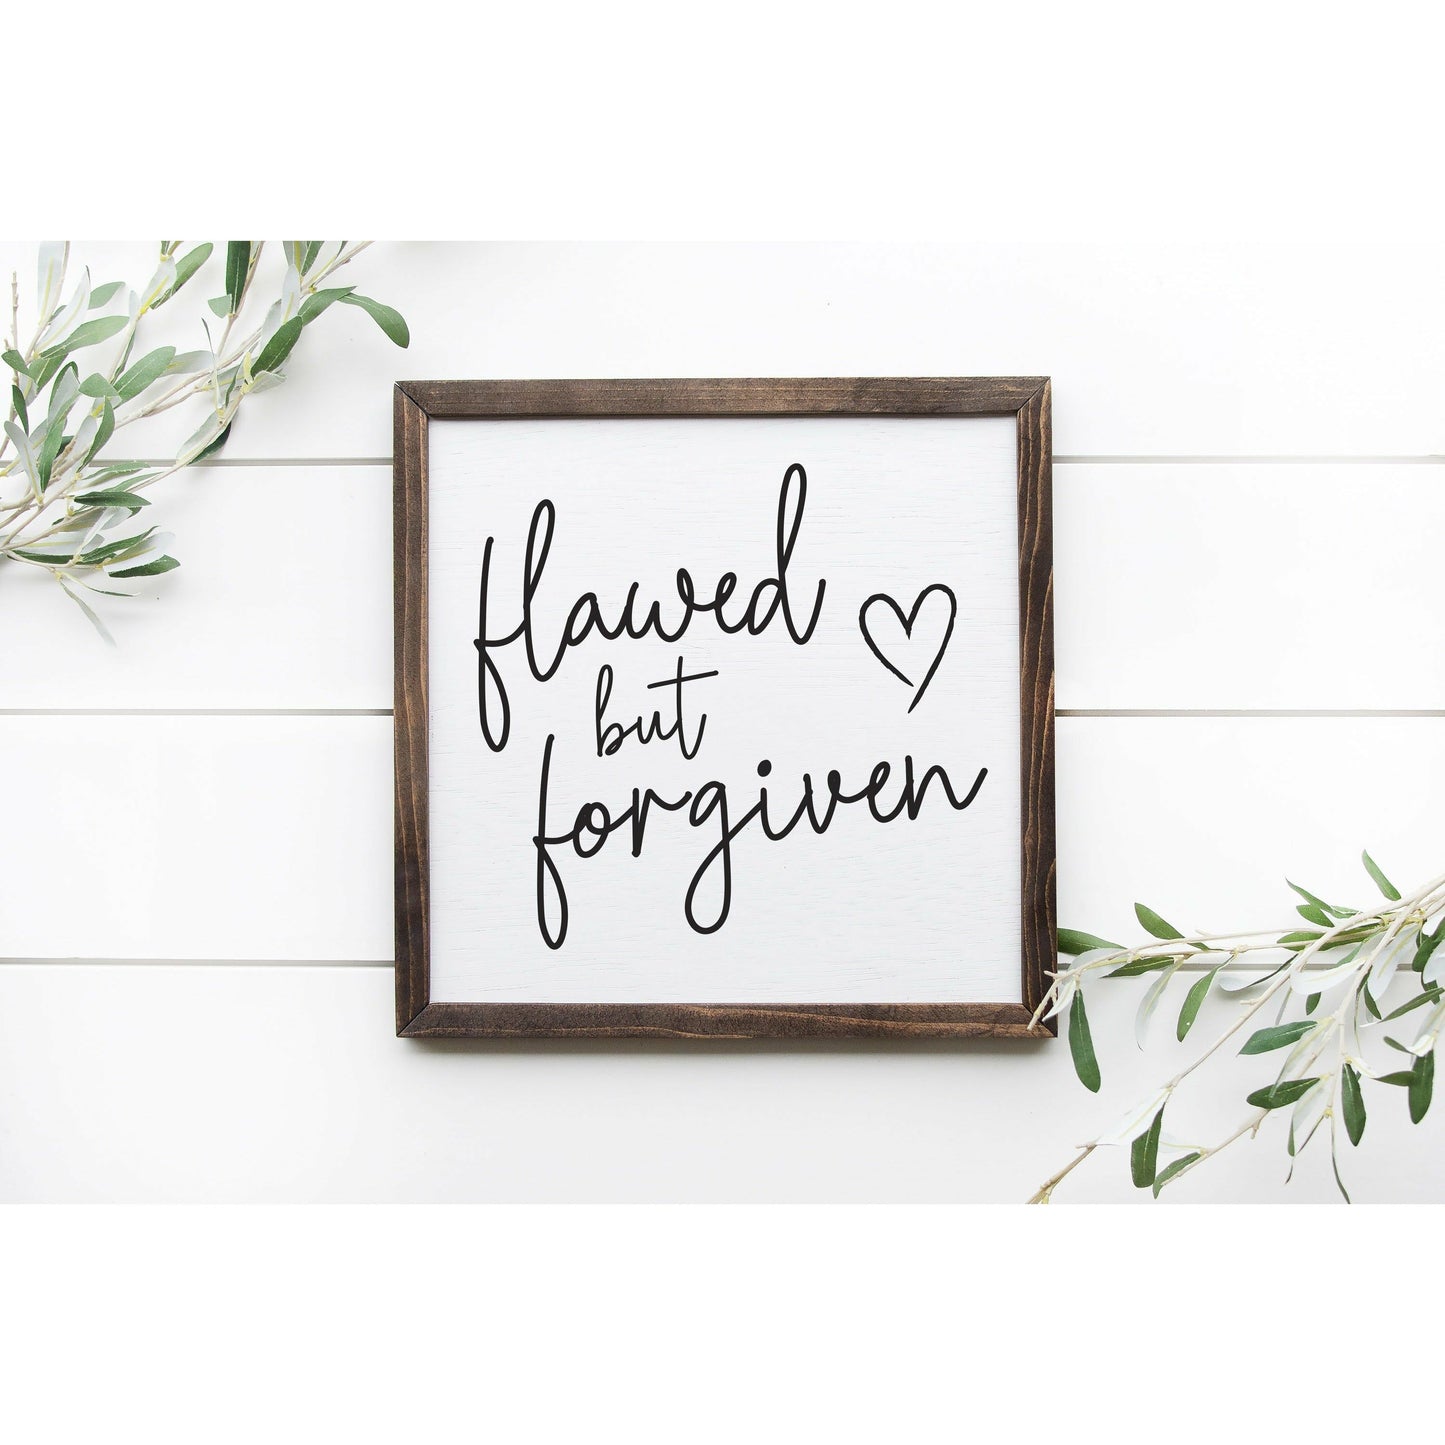 Flawed But Forgiven - Rustic Wooden Wall Art Sign